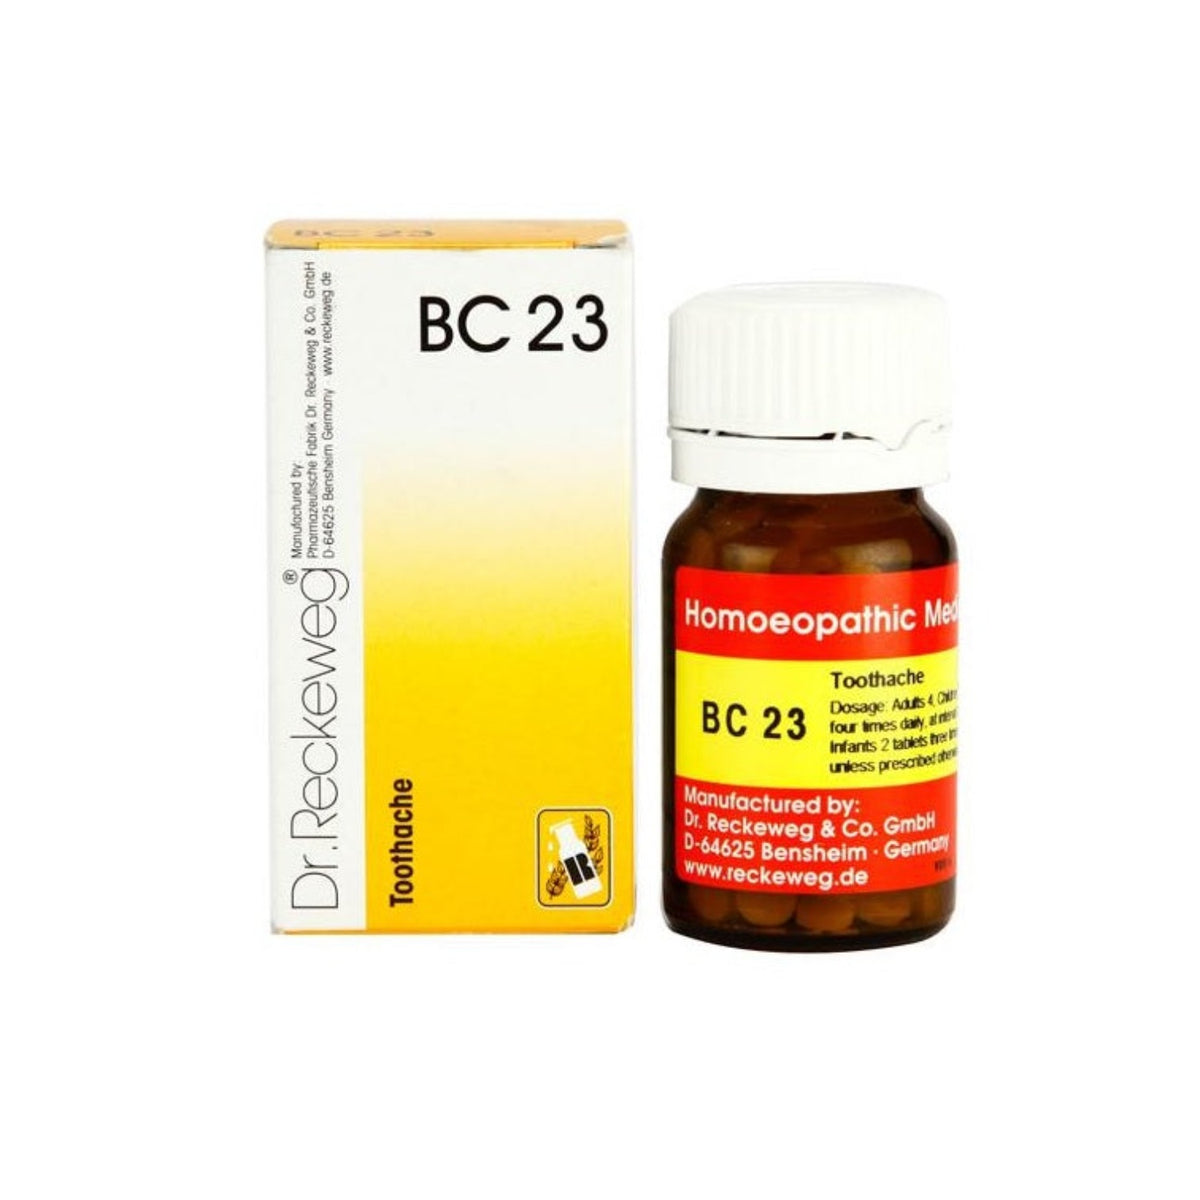 Dr Reckeweg Homoeopathy Toothache Bio-Combination 23 (BC 23) 20gm Tablet